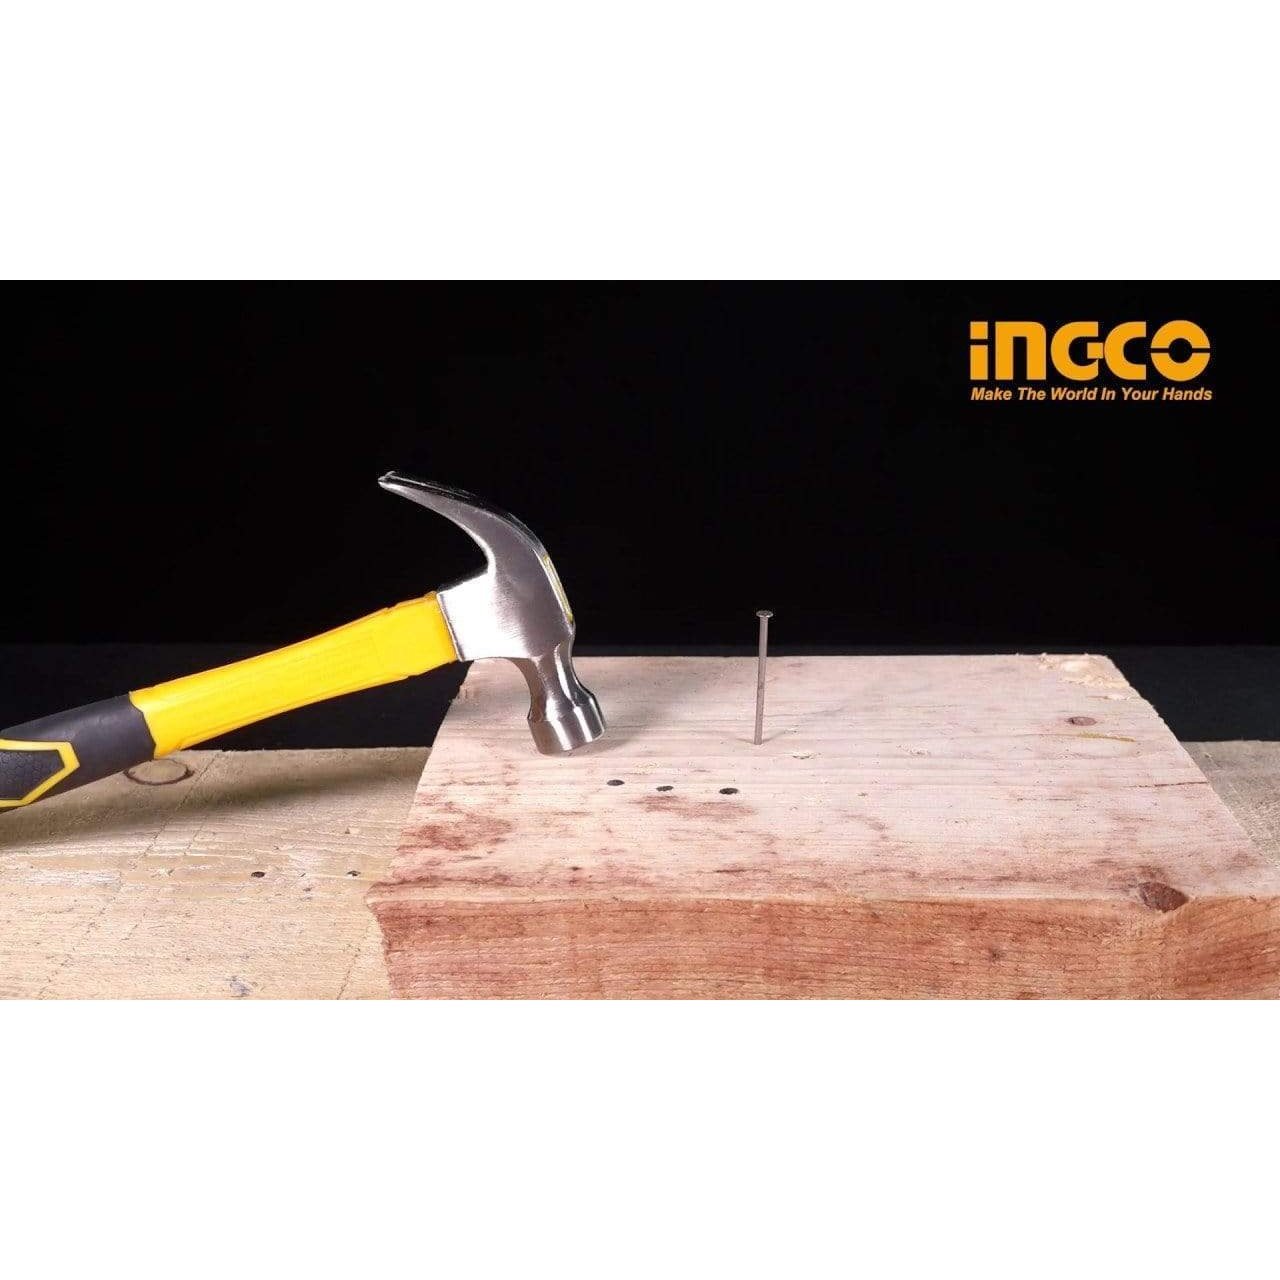 Ingco Claw hammer - 220g, 450g & 560g | Supply Master | Accra, Ghana Tools Building Steel Engineering Hardware tool